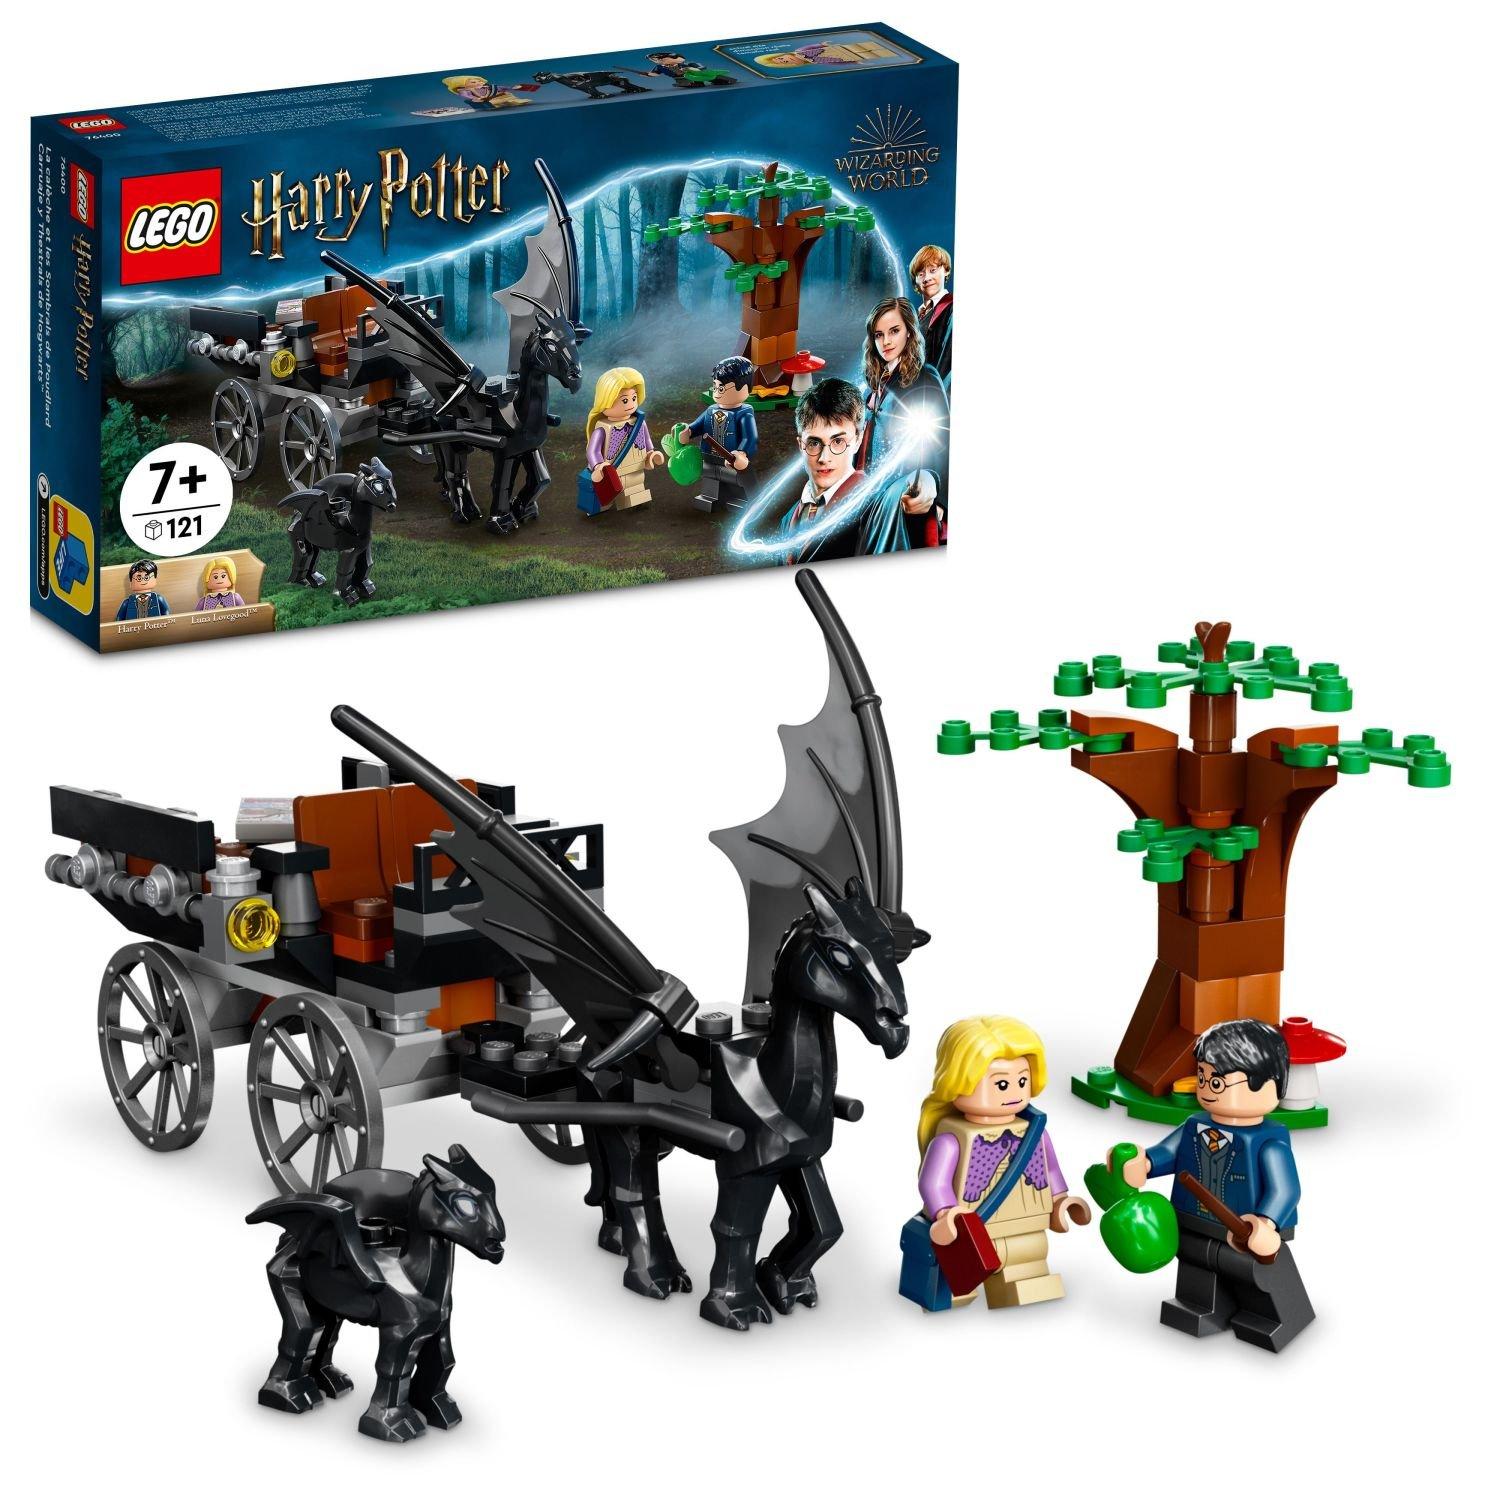 LEGO Harry Potter Hogwarts Carriage and Thestrals 76400 Building Kit